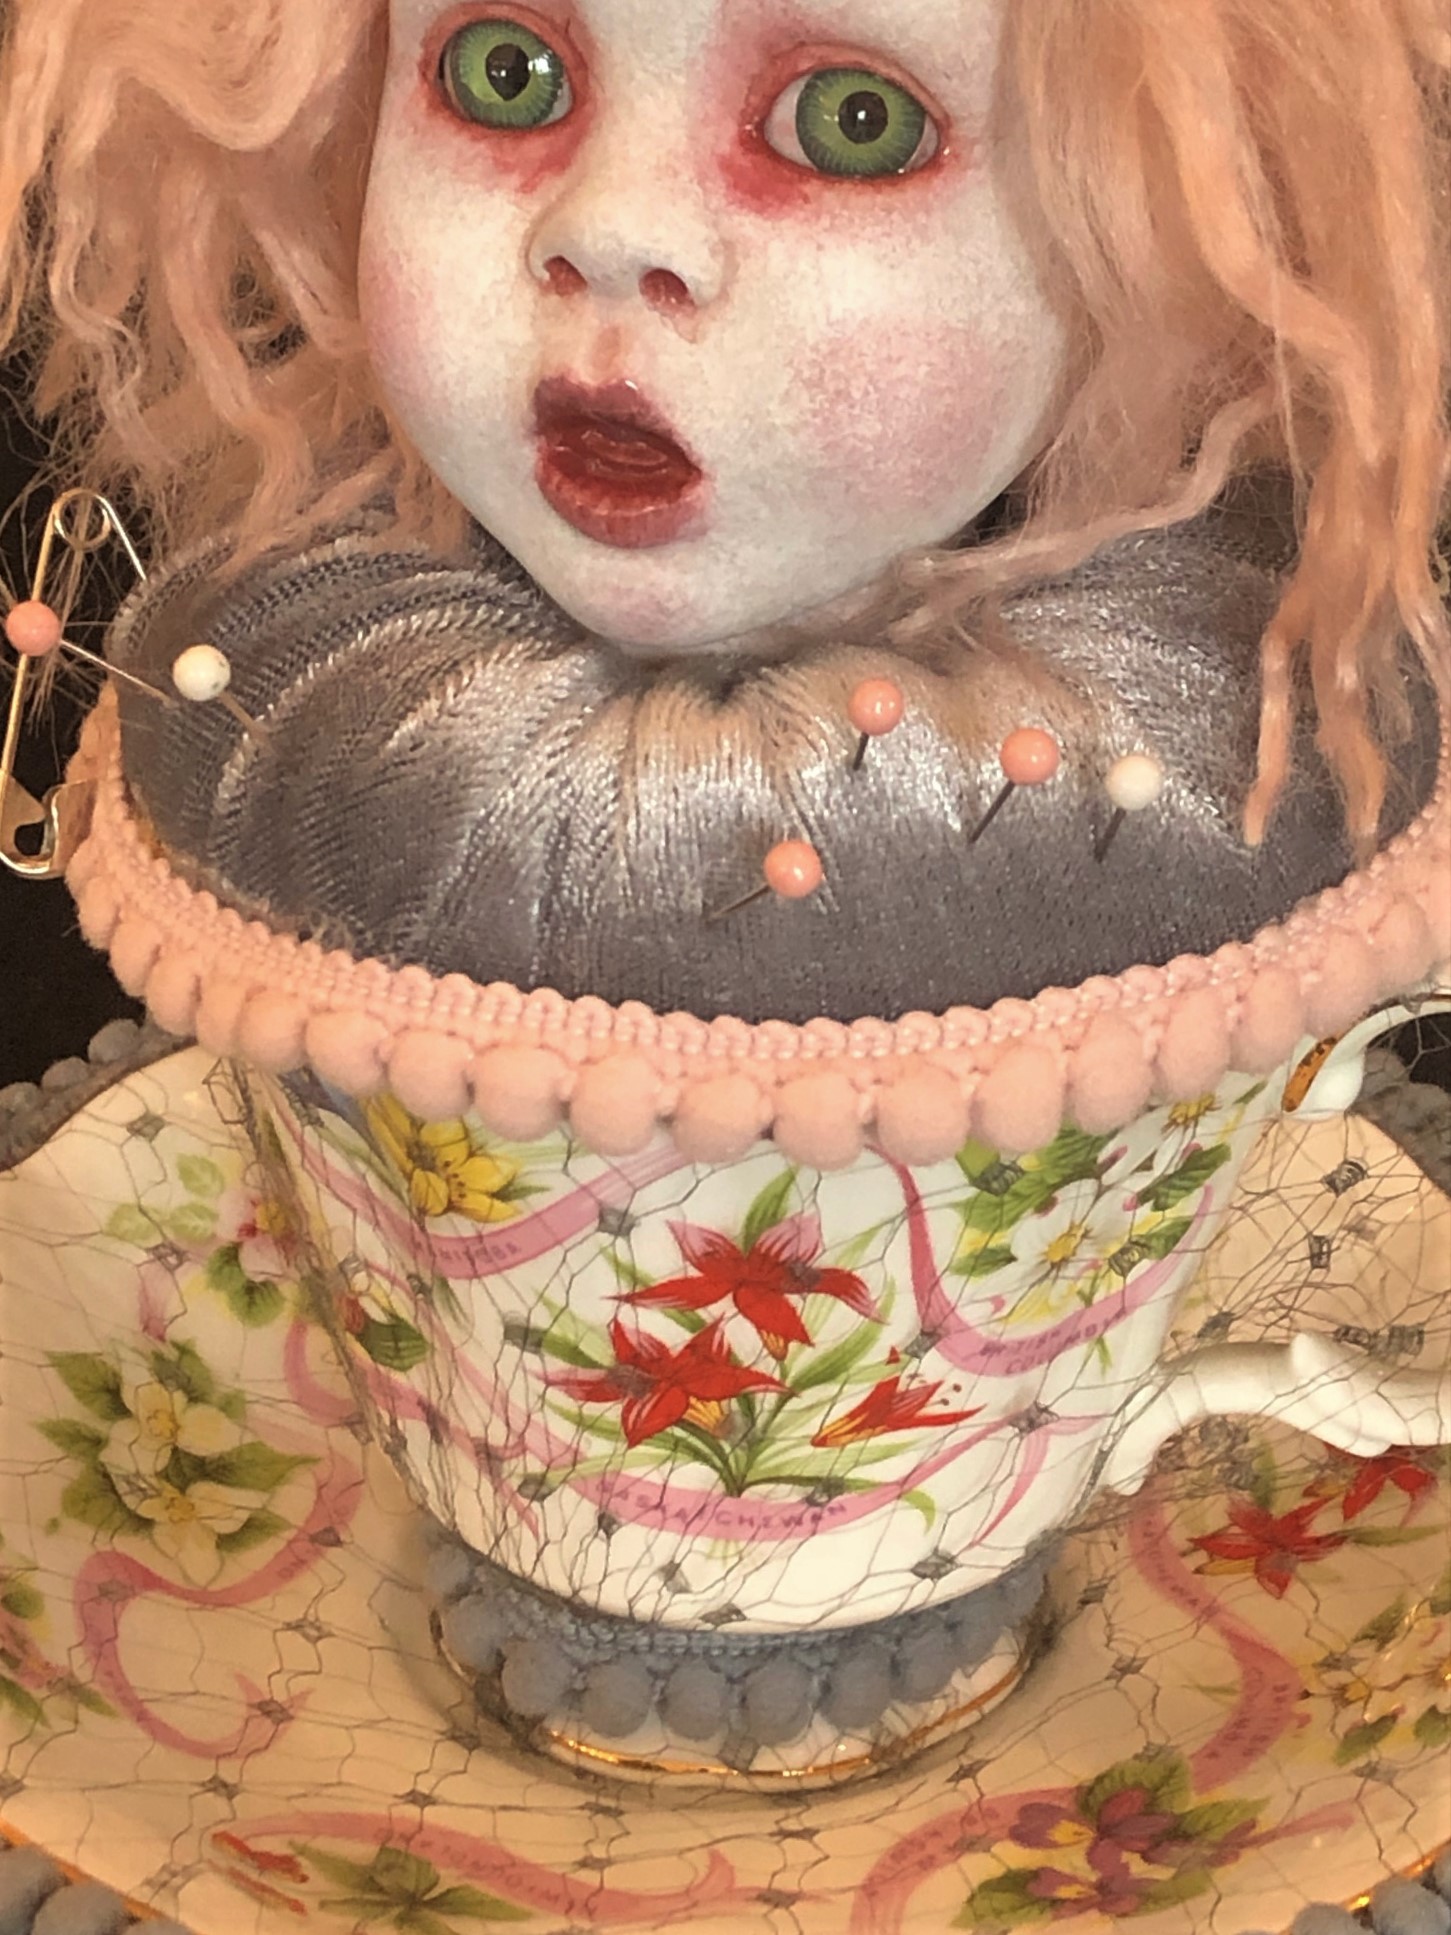 close-up of pale porcelain doll head gothic repaint wild strawberry blond hair sits on a gray velvet cushion with pins in it in a vintage floral teacup